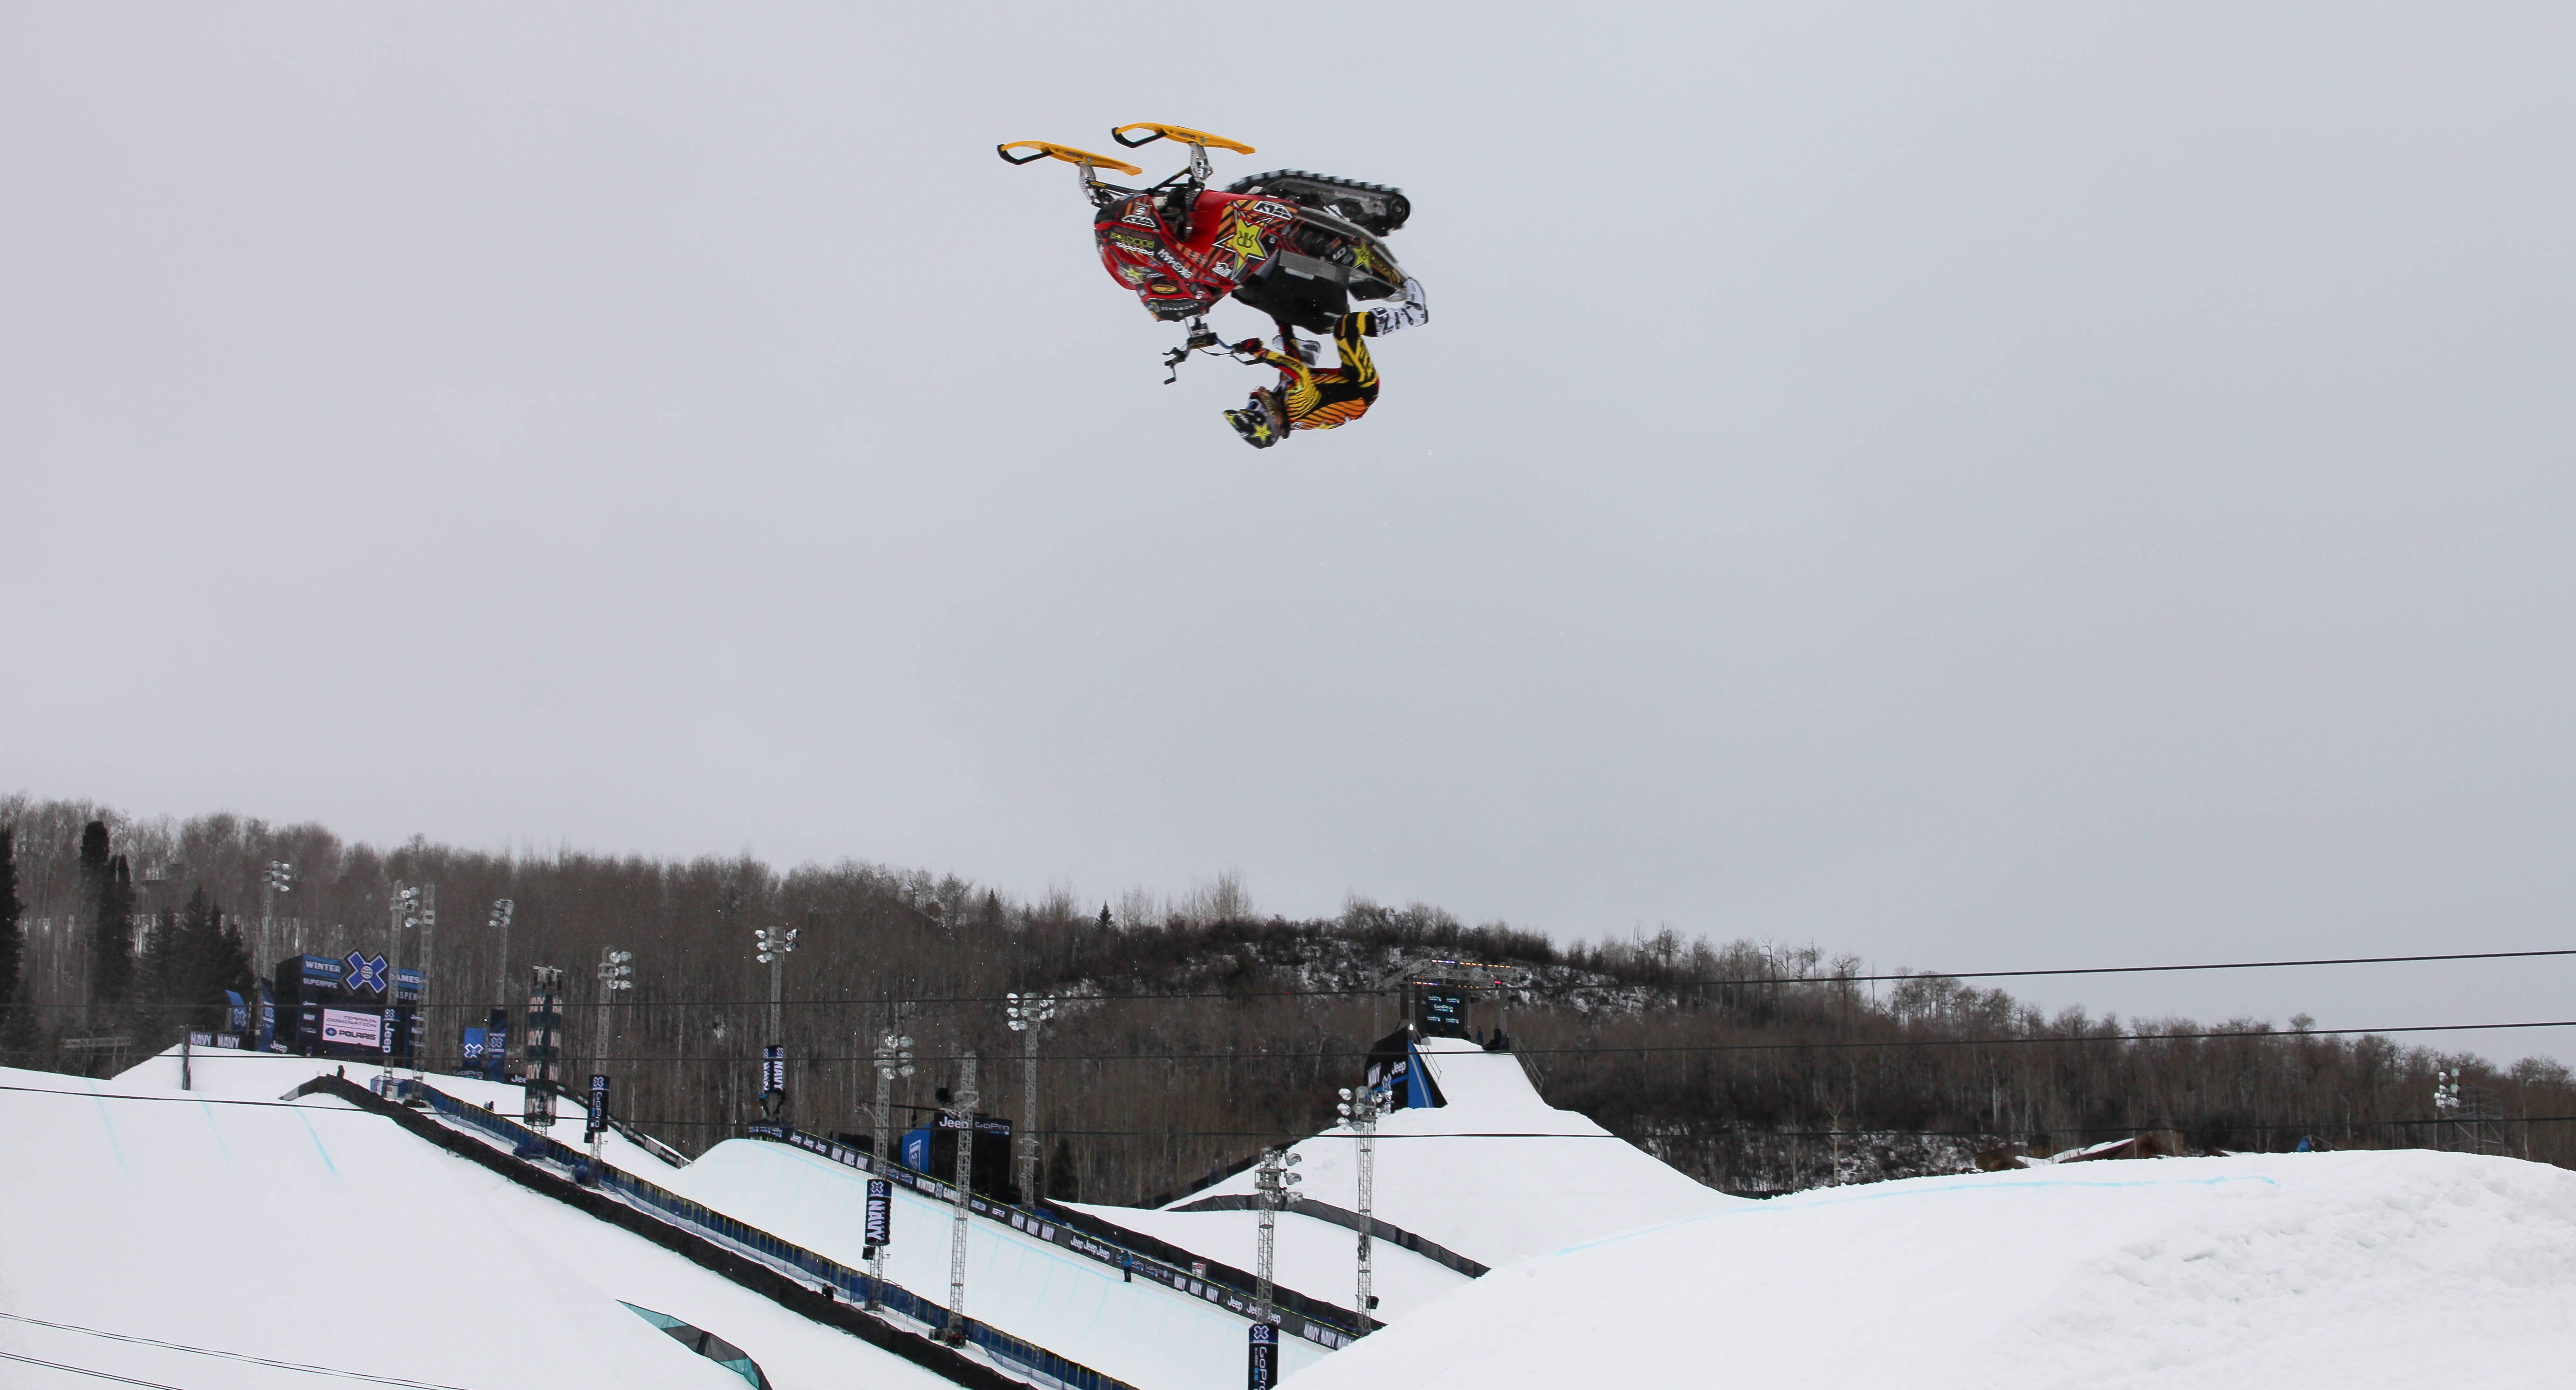 Caleb Moore at the Aspen X Games, on a practice jump the day of his crash